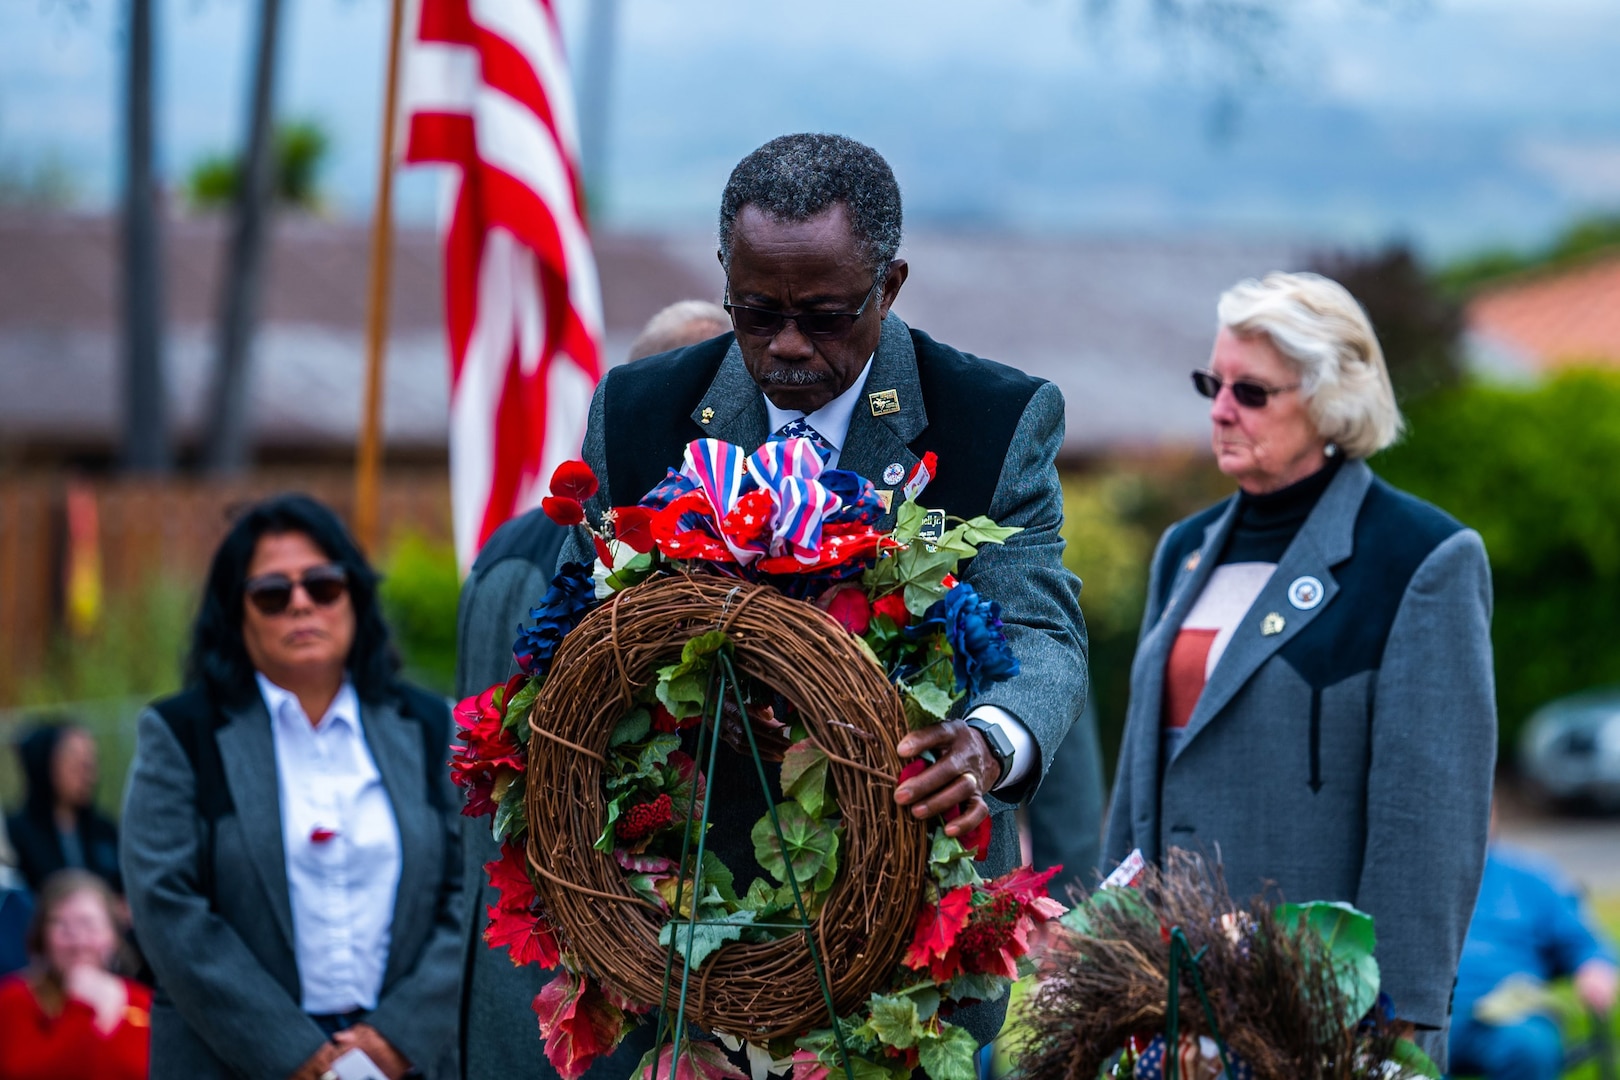 A man lays a wreath down during a Memorial Day ceremony at a cemetery.